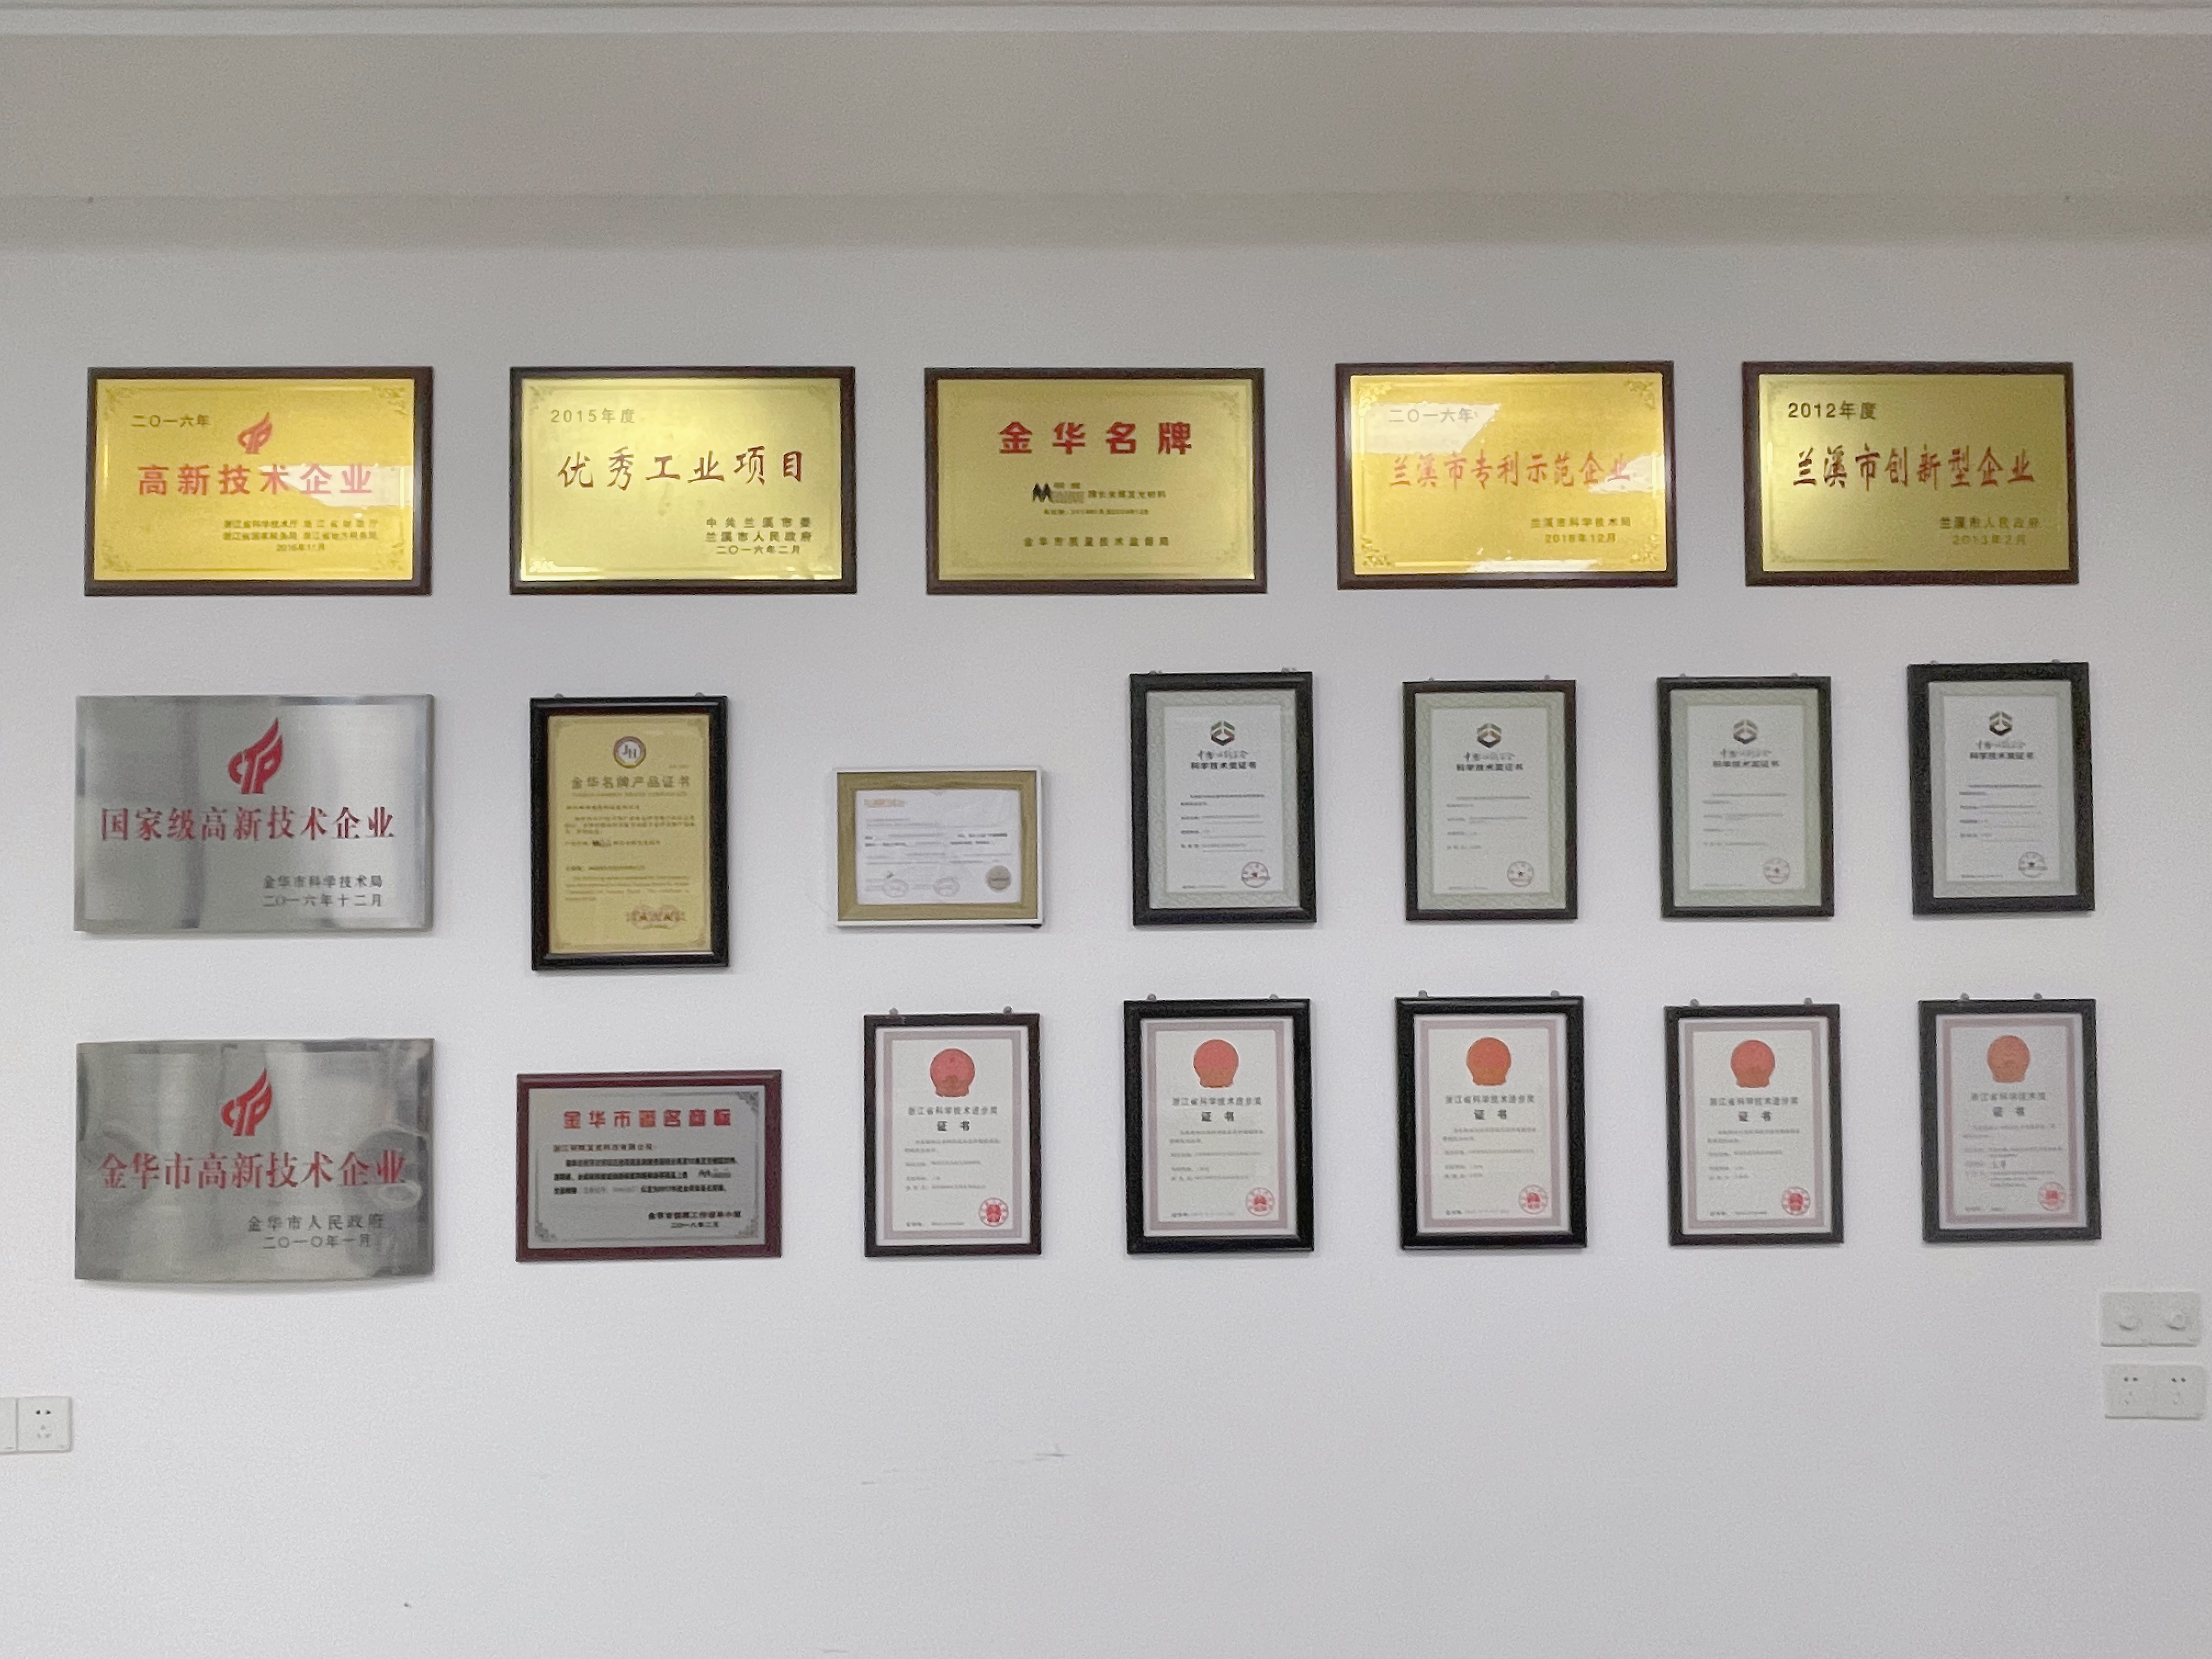 Zhejiang Minhui Is Granted Provincial Photoluminescent and Visual Recognition Optical Functional Materials R&D Center Certification